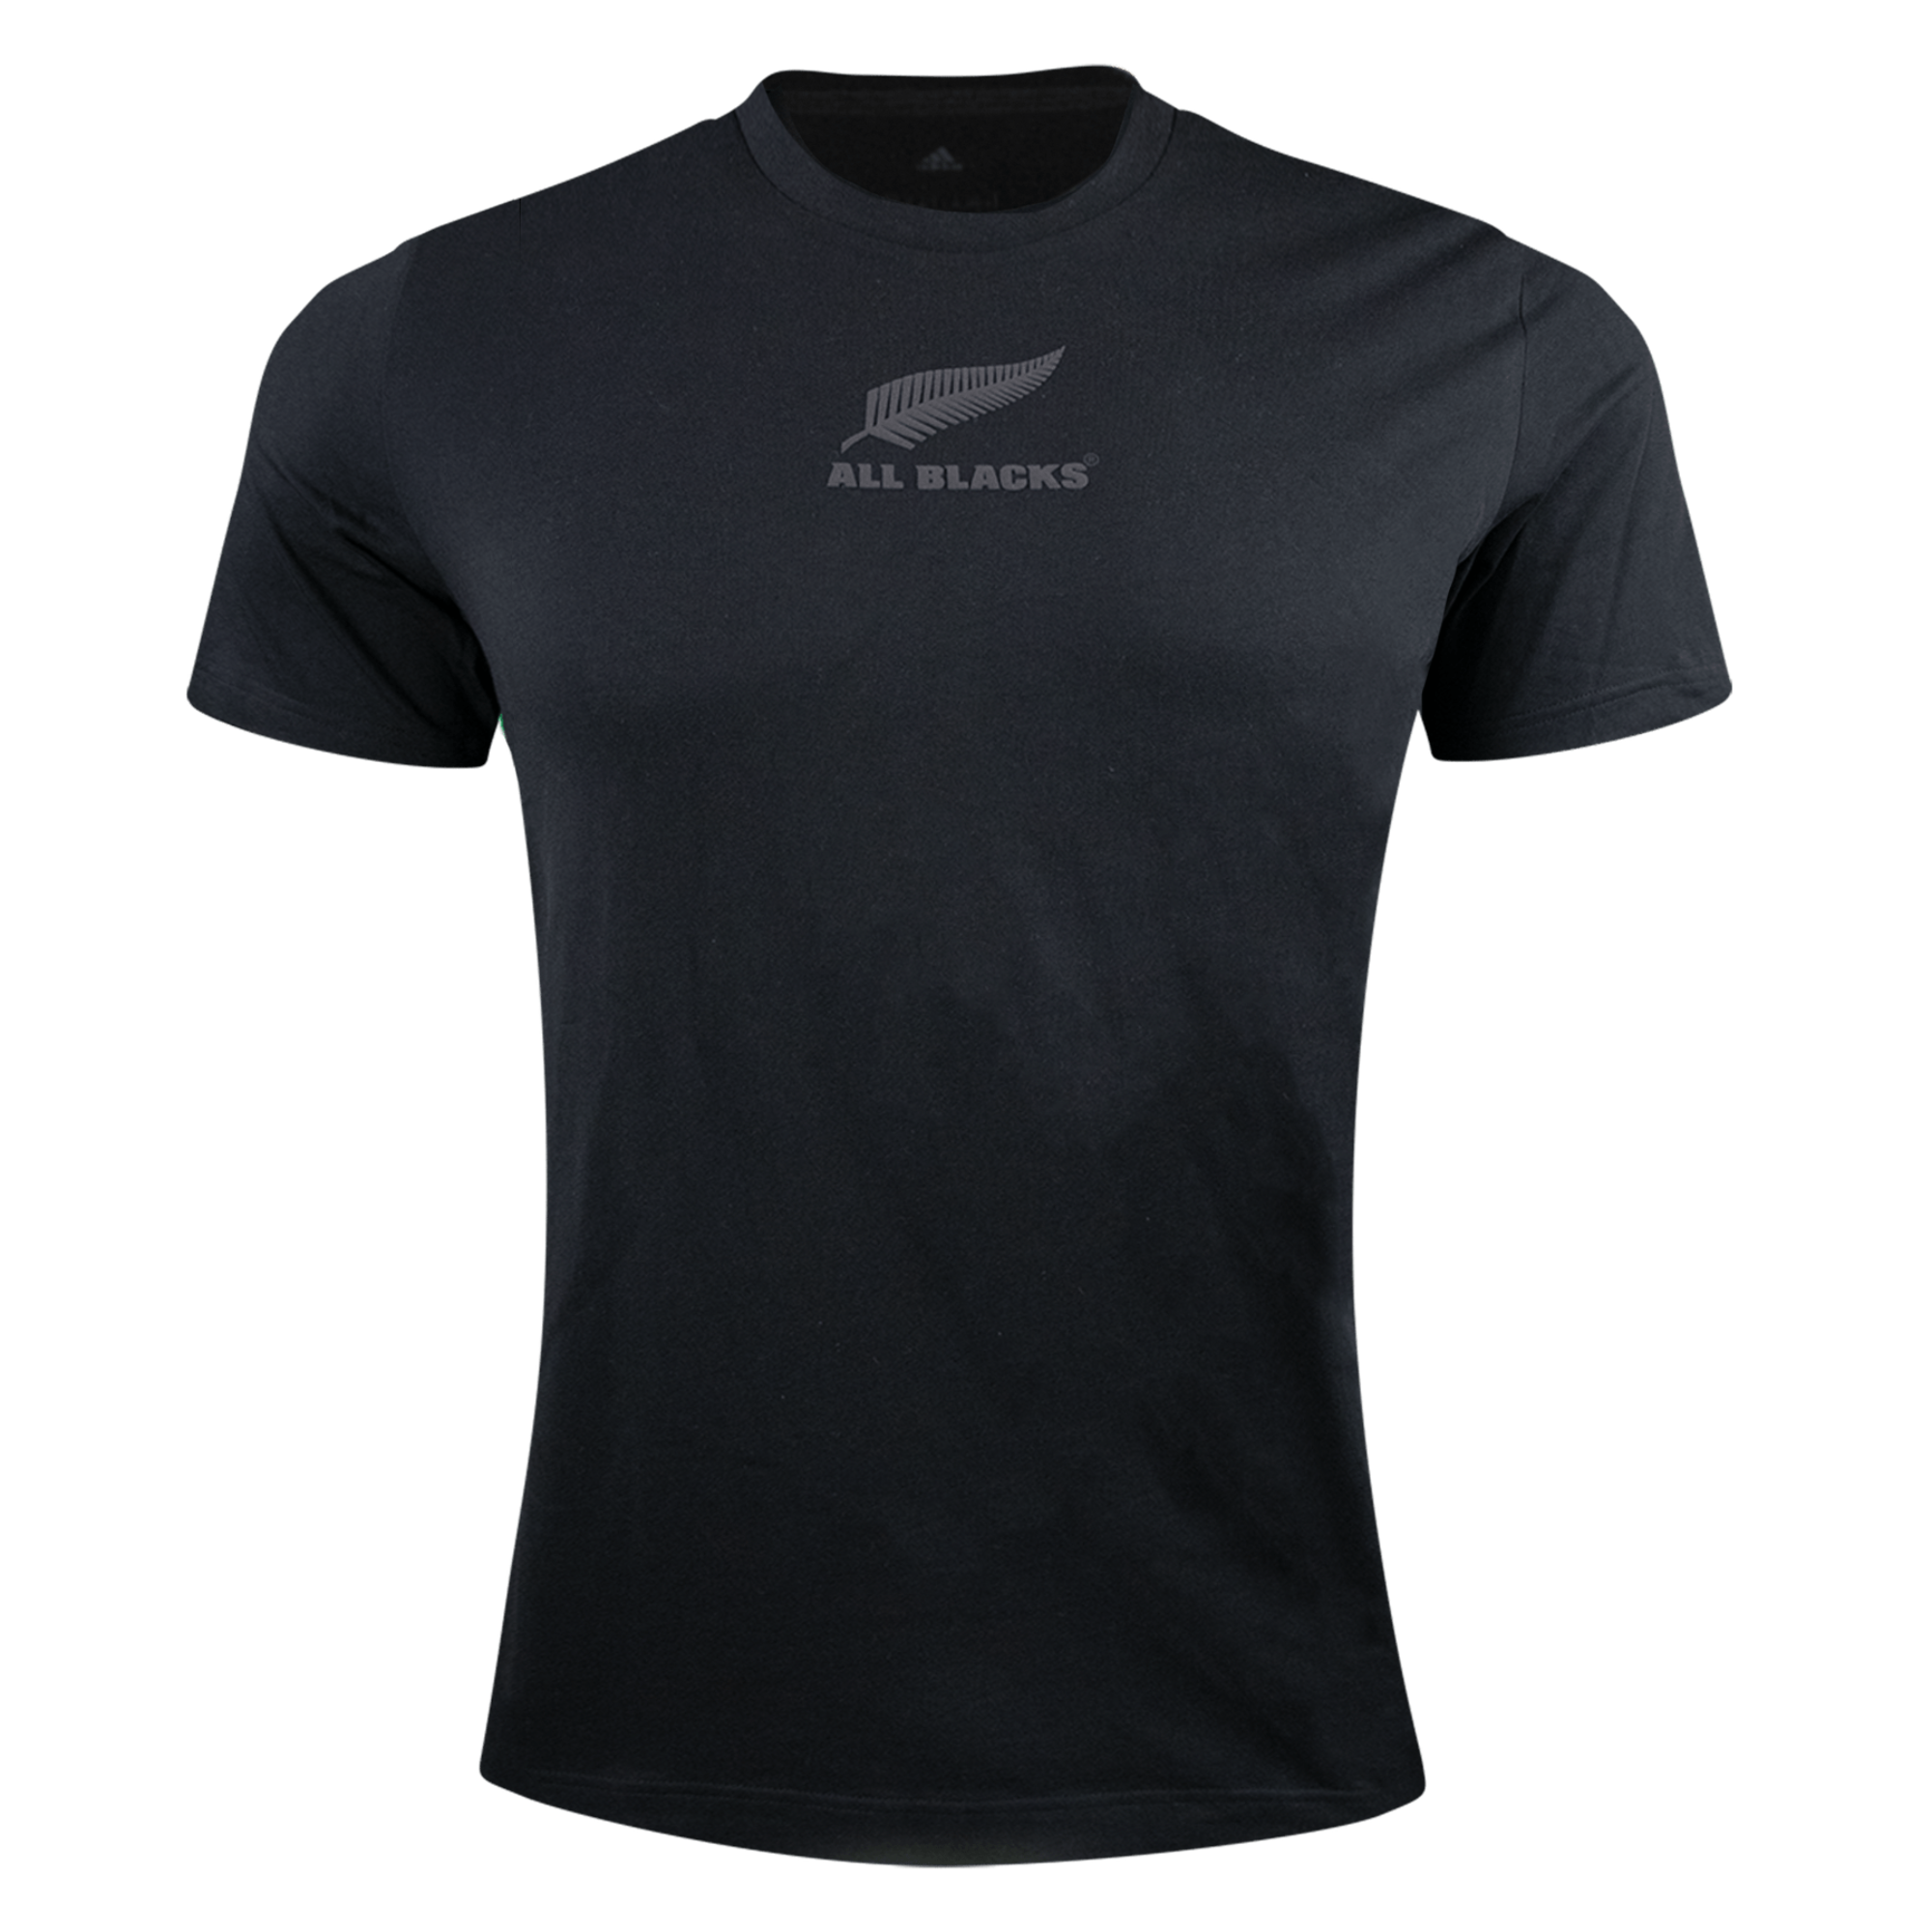 elemento bueno oído All Blacks Rugby T-Shirt by adidas | New Zealand Lifestyle Cotton Rugby Tee  - Black - World Rugby Shop